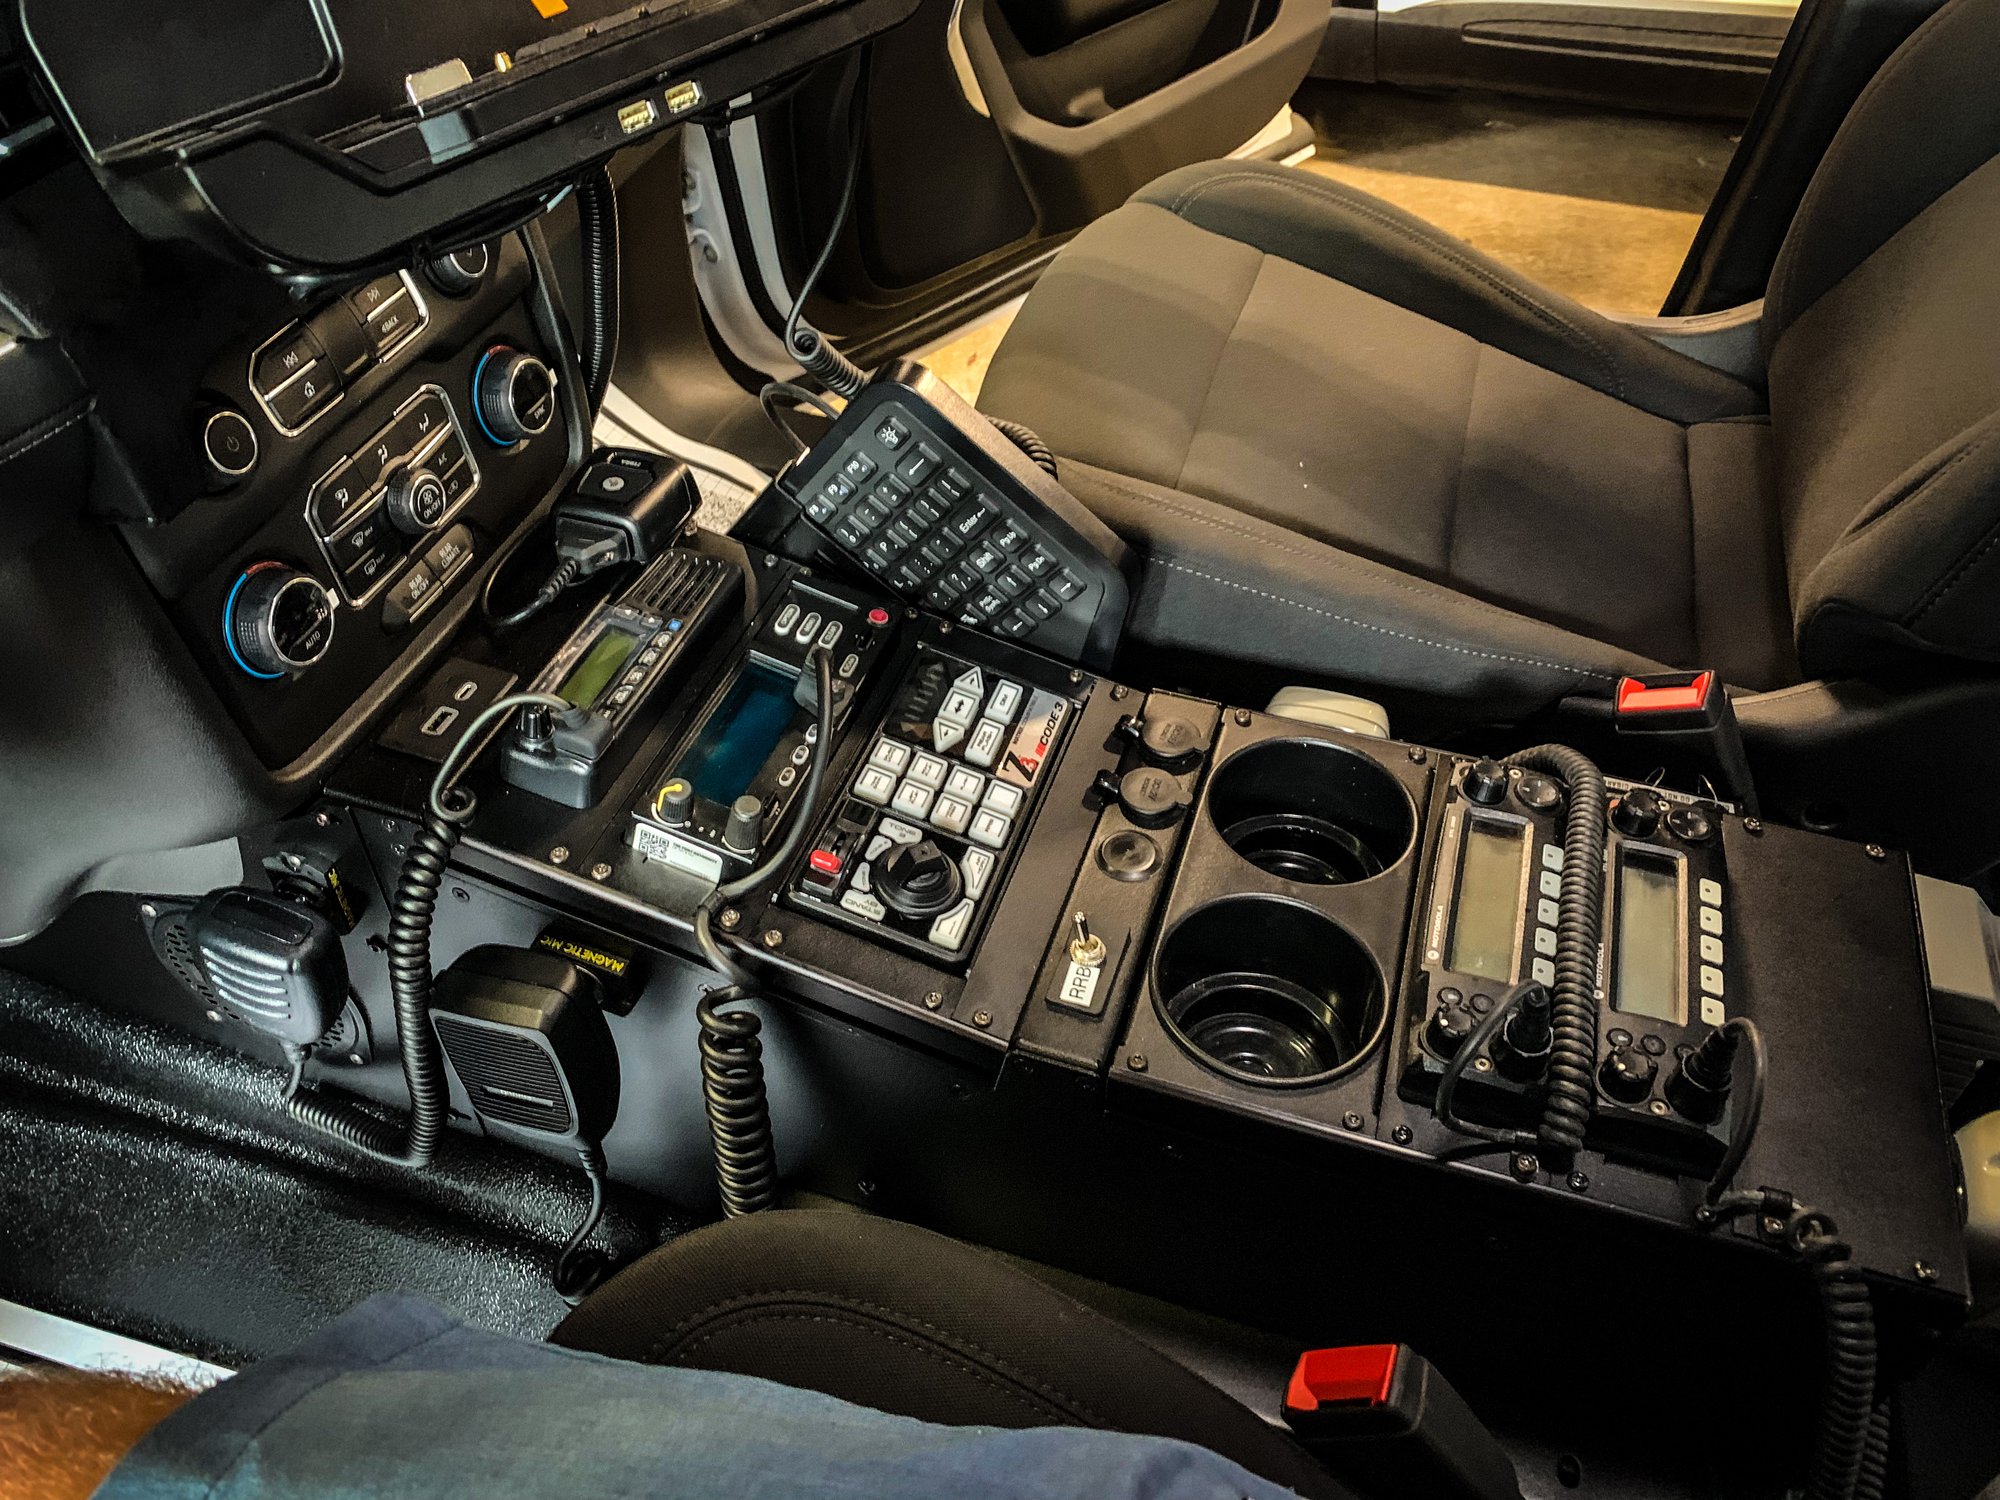 police cruiser console with many radio systems